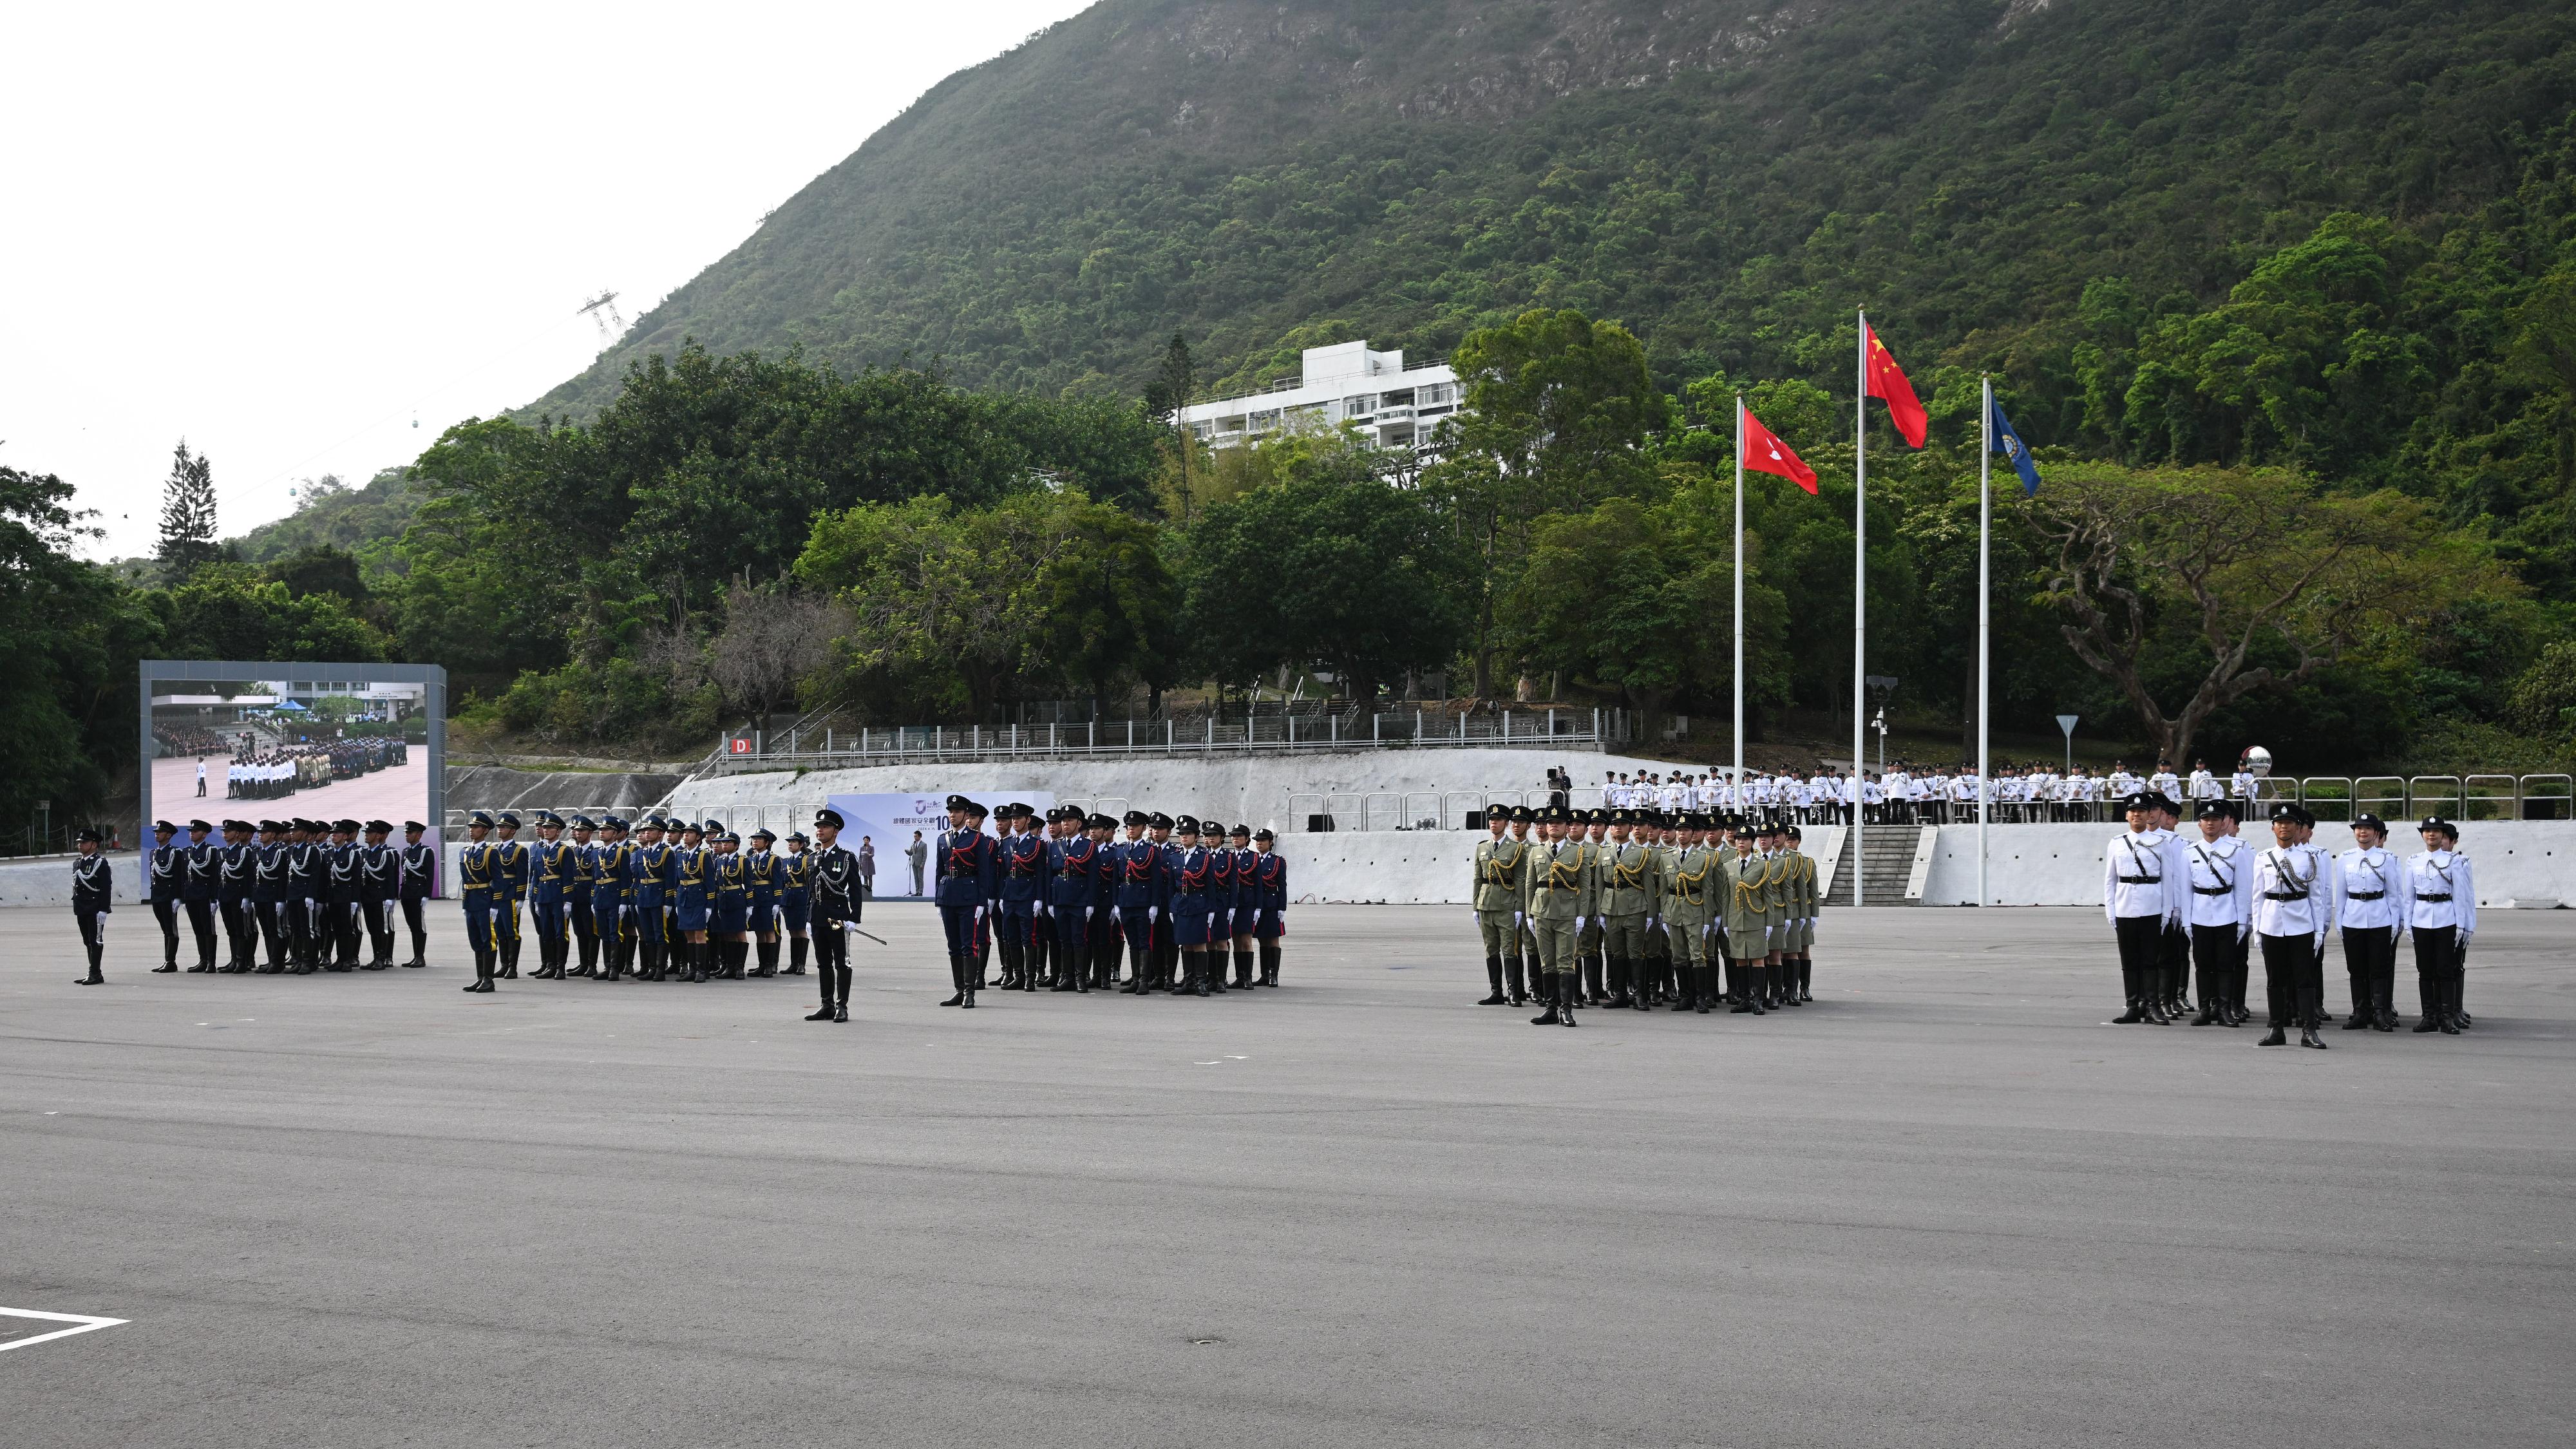 The Security Bureau and its disciplined services jointly held a National Security Education Day flag-raising ceremony at the Hong Kong Police College today (April 15). Photo shows the disciplined services ceremonial guard lining up at the flag-raising ceremony.